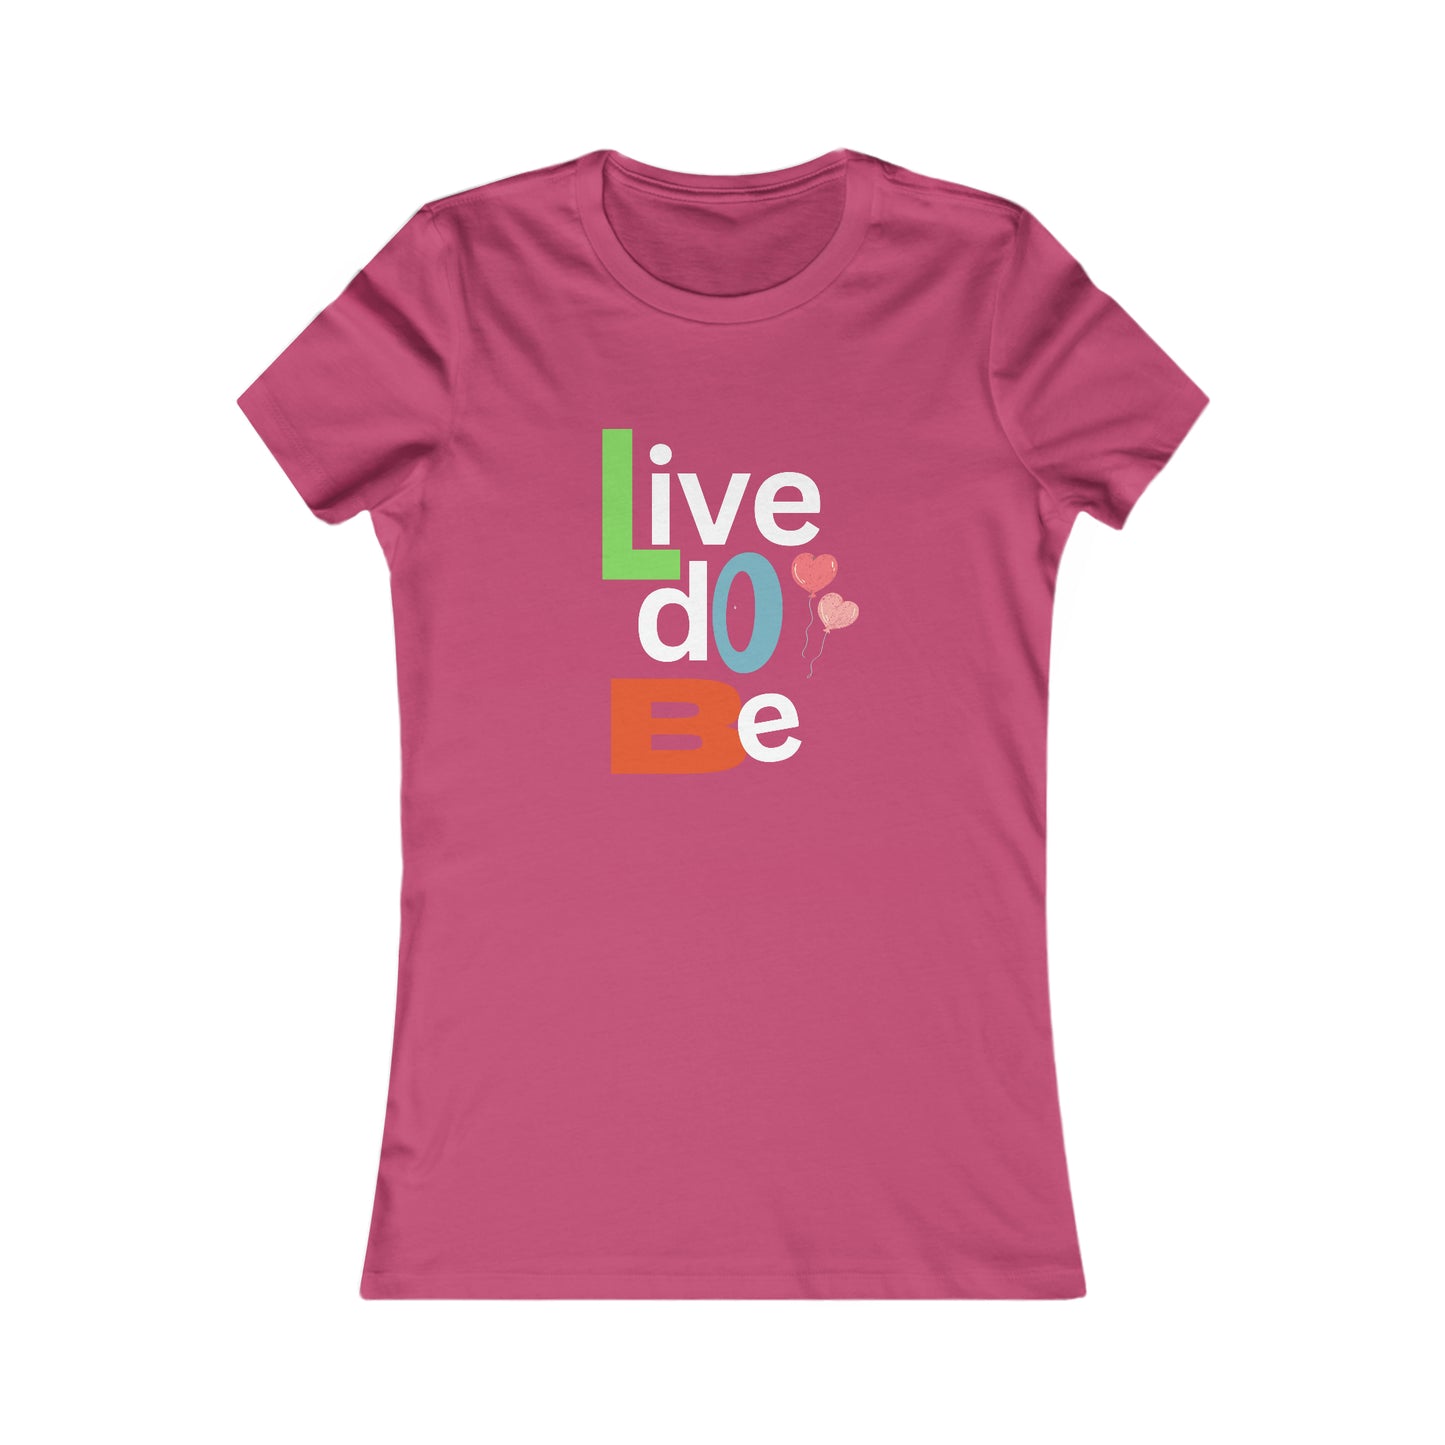 "Live, Do Be" Women's Equality T-Shirt